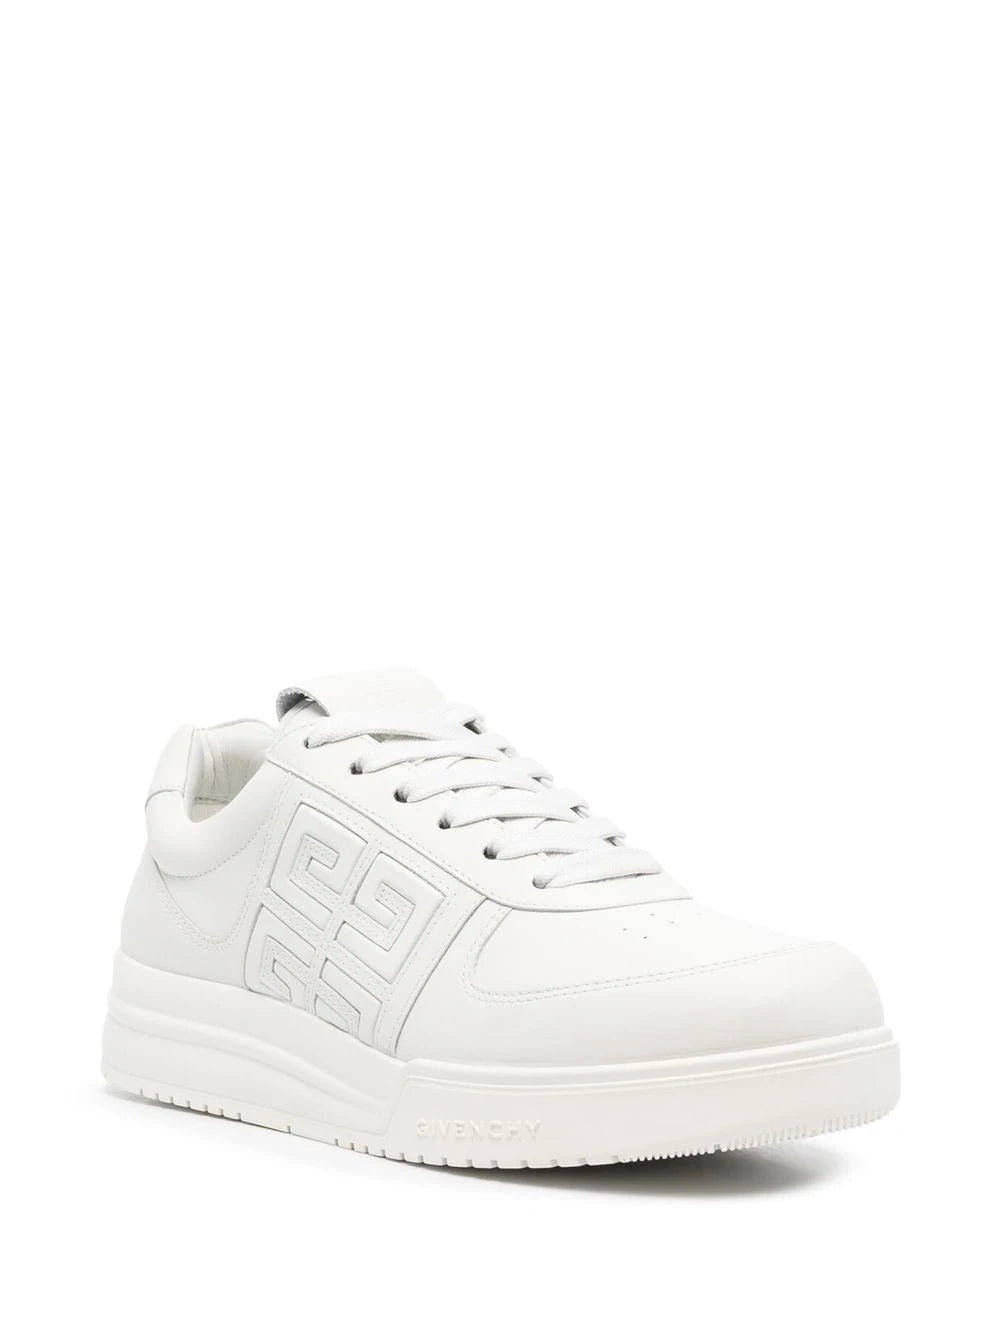 Givenchy BE0030 Woman White Sneakers - Zuklat